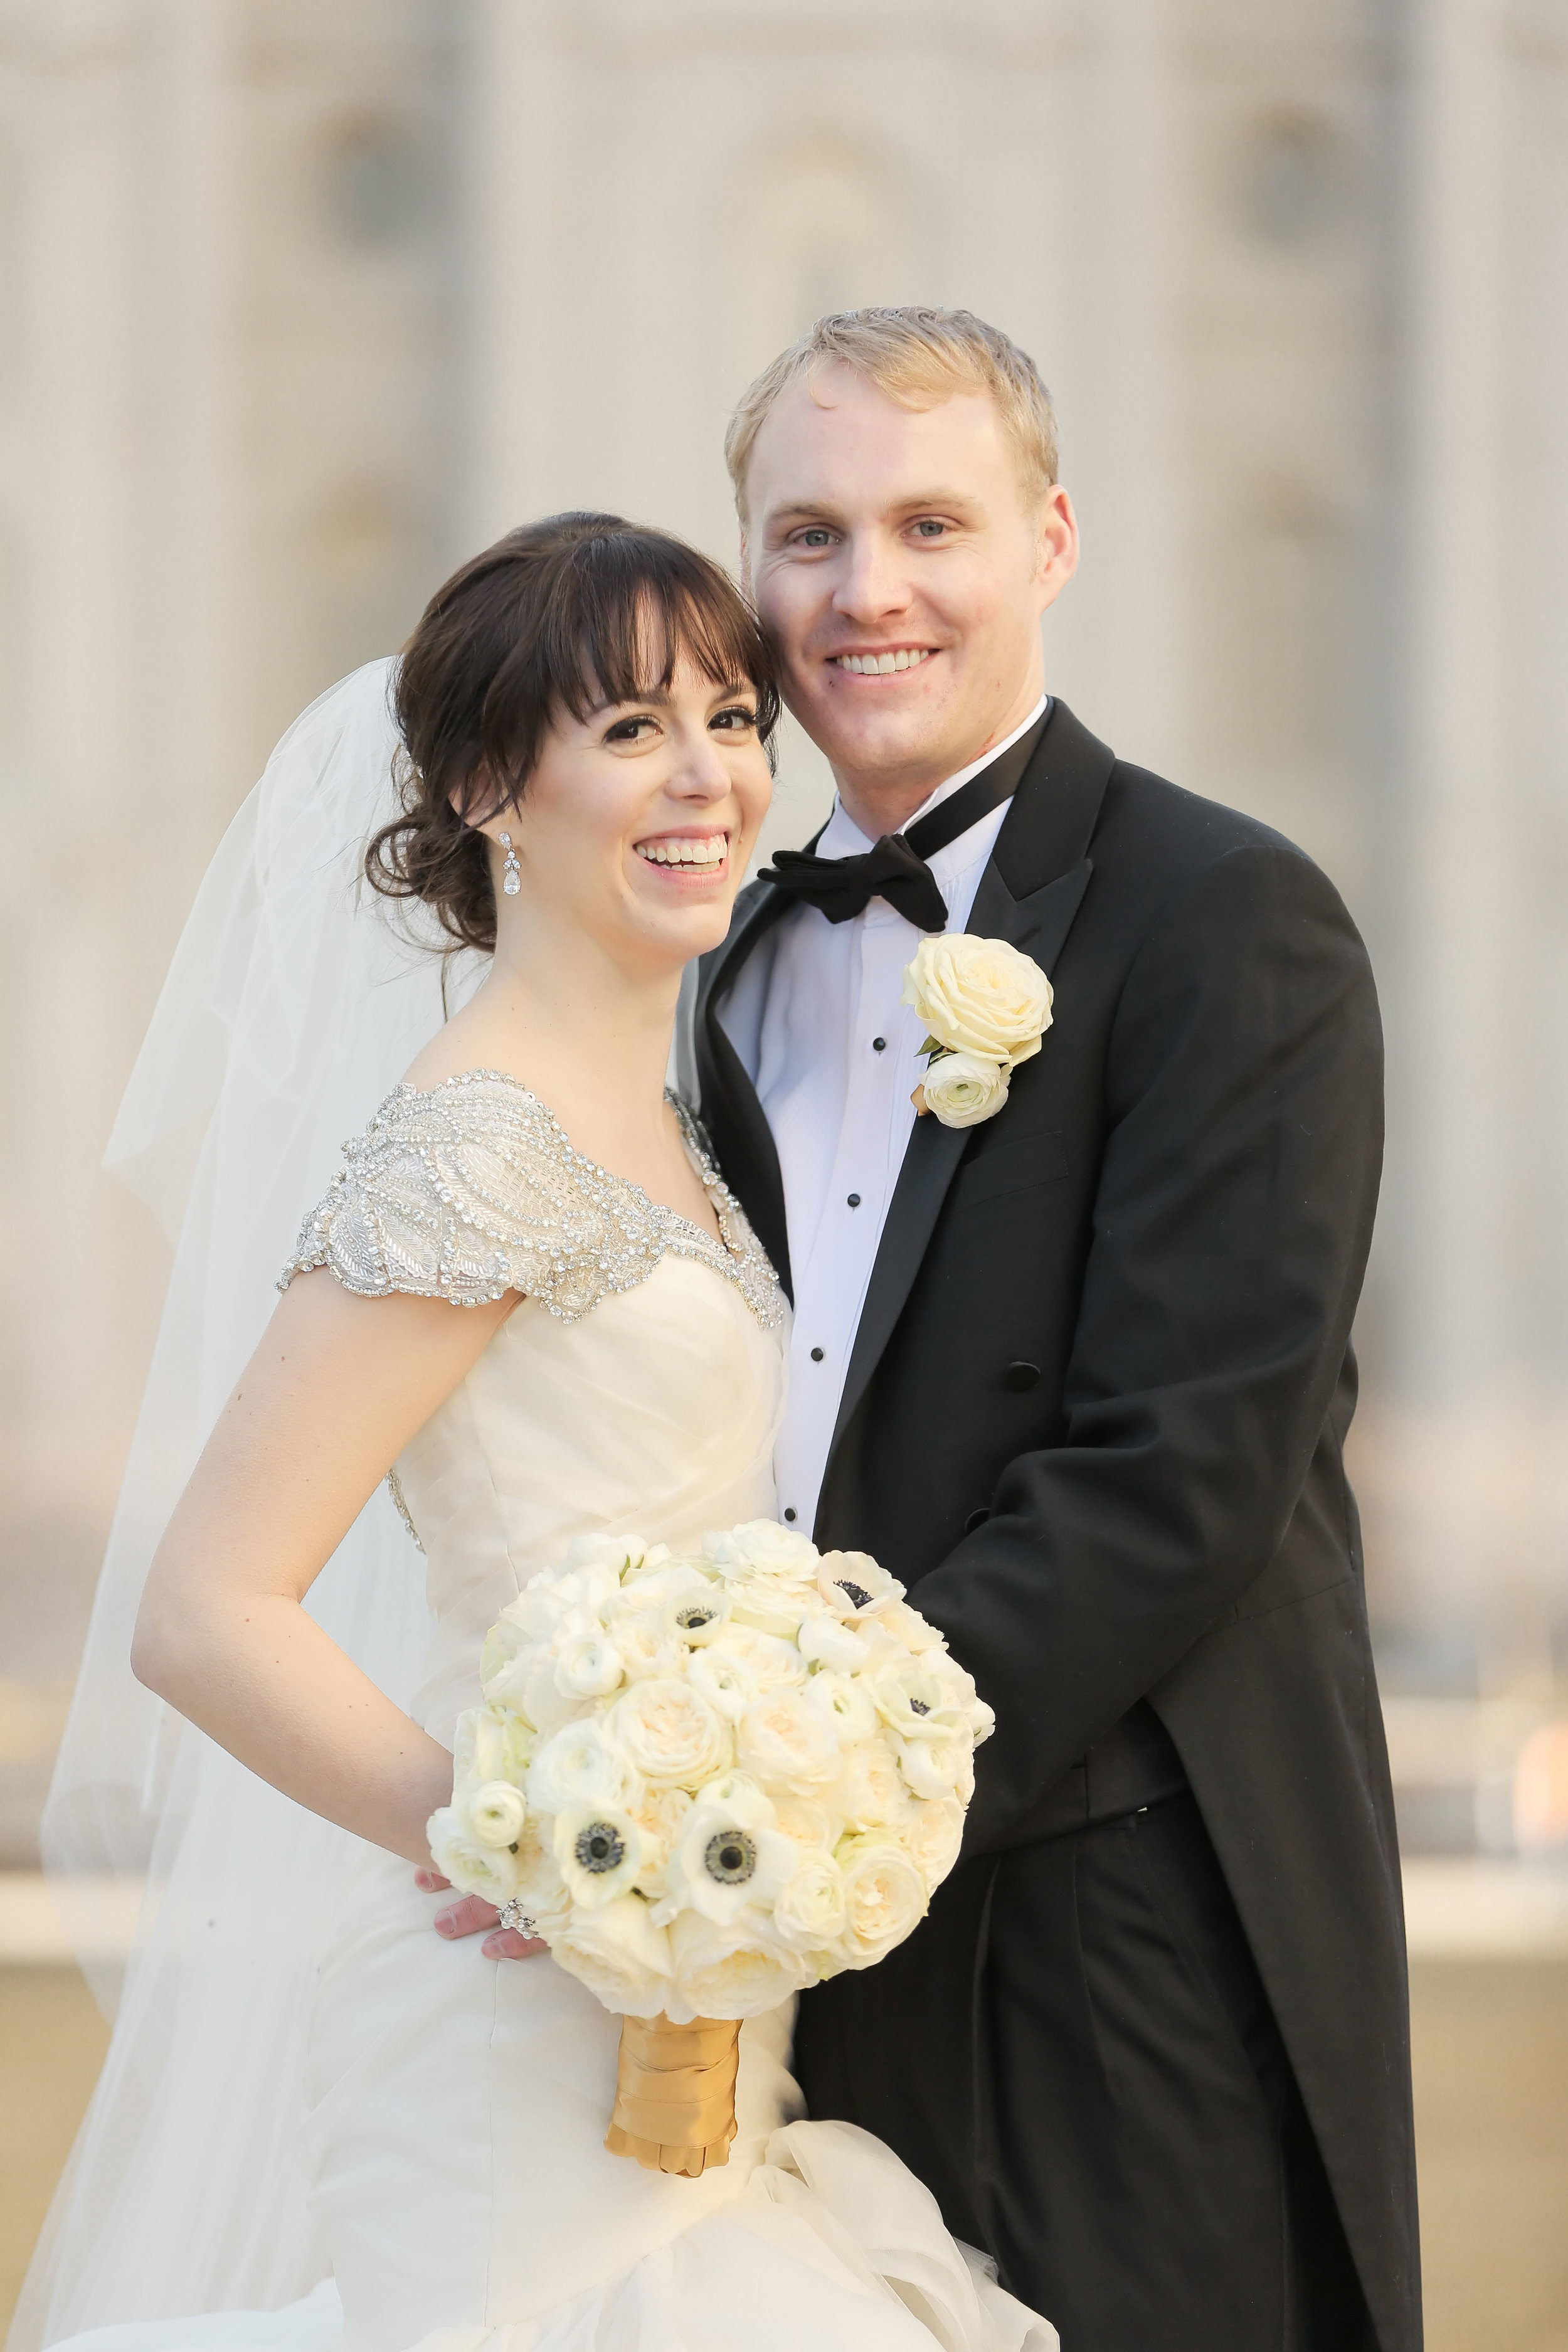 Utah State Capitol Wedding | Silver, Gold, Black, and White Wedding | NYE Wedding | Michelle Leo Events | Utah Event Planner and Designer | Pepper Nix Photography